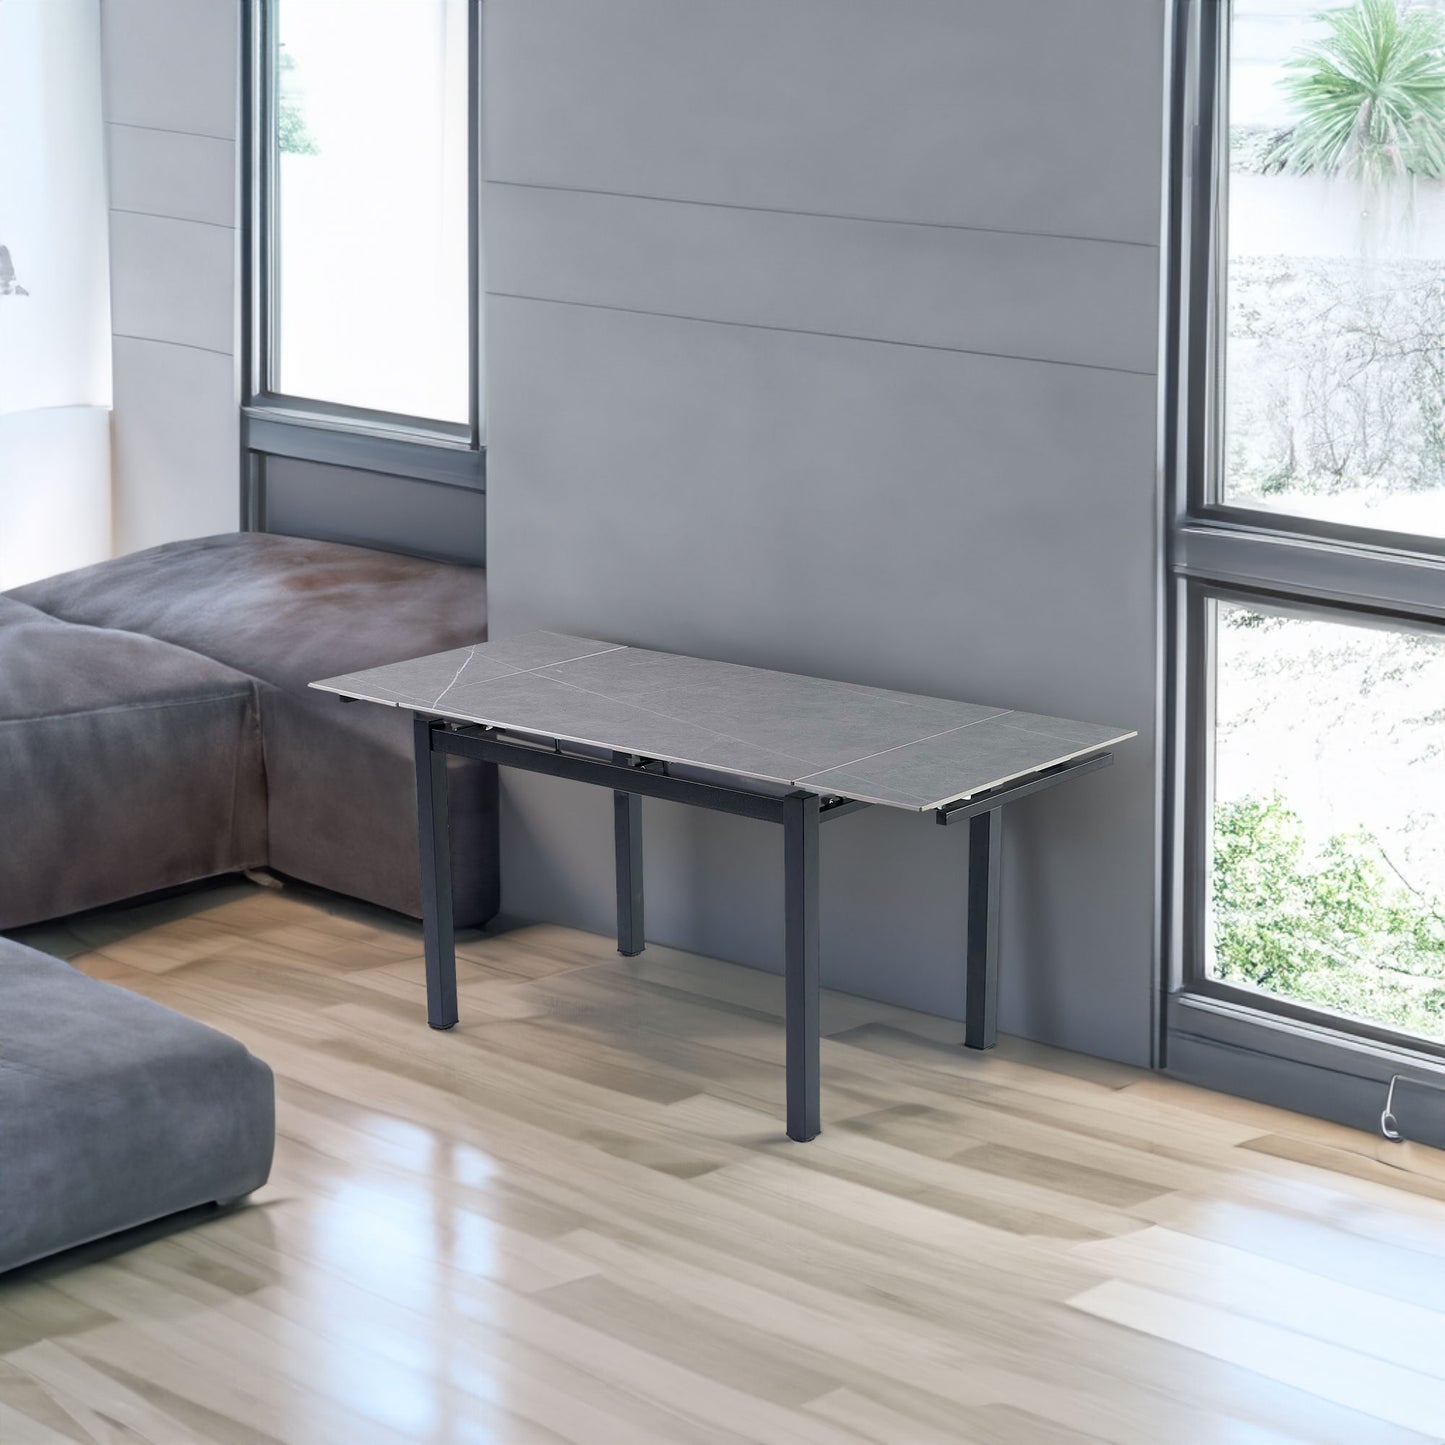 Grey Ceramic Modern Rectangular Expandable Dining Room Table For Space-Saving Kitchen Small Space -Table